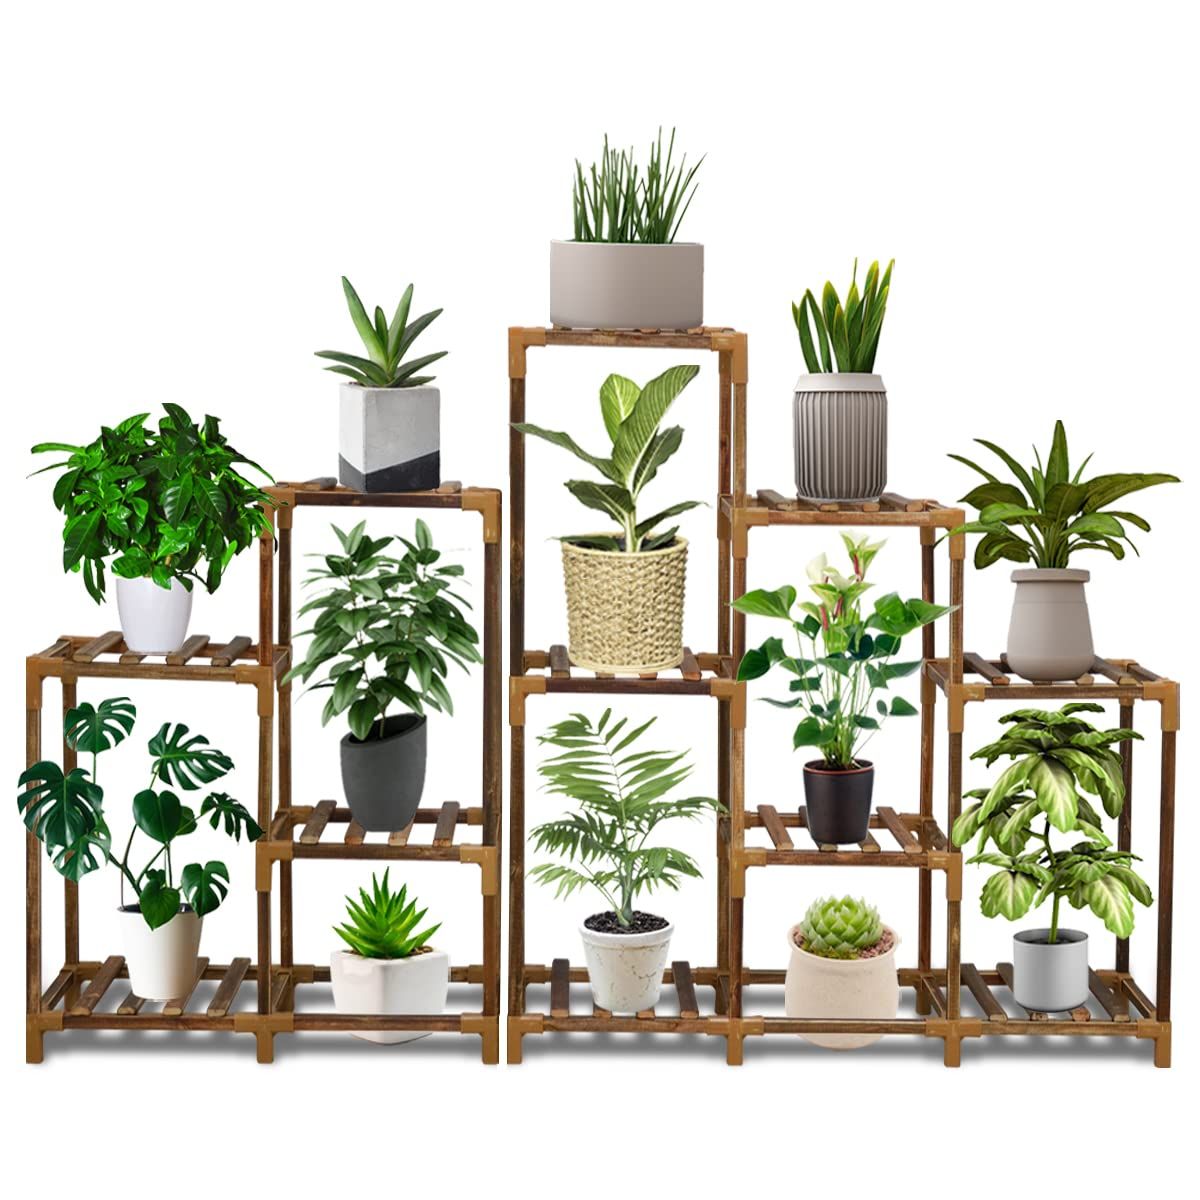 GHodec Plant Stand Indoor Outdoor,12 Tier Corner Plant Shelf Wood Plant Stand Rack Flower Holedr for | Amazon (US)